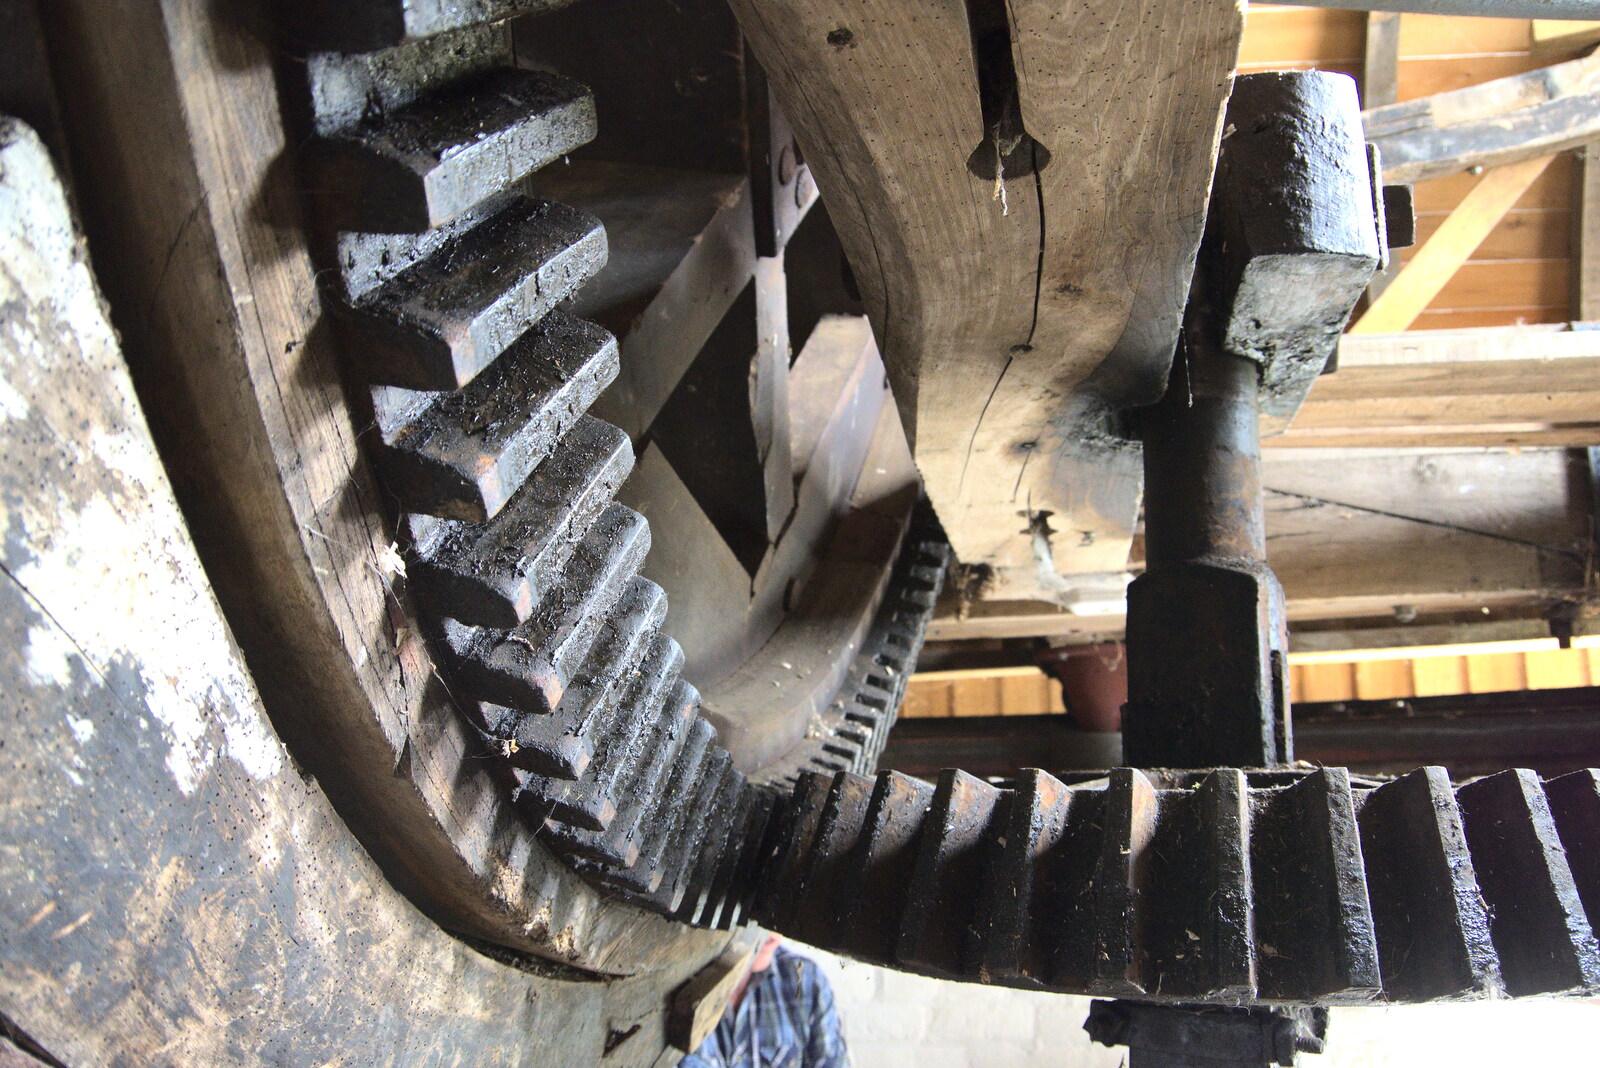 A close-up of gears from An Open Day at the Windmill, Billingford, Norfolk - 21st August 2021